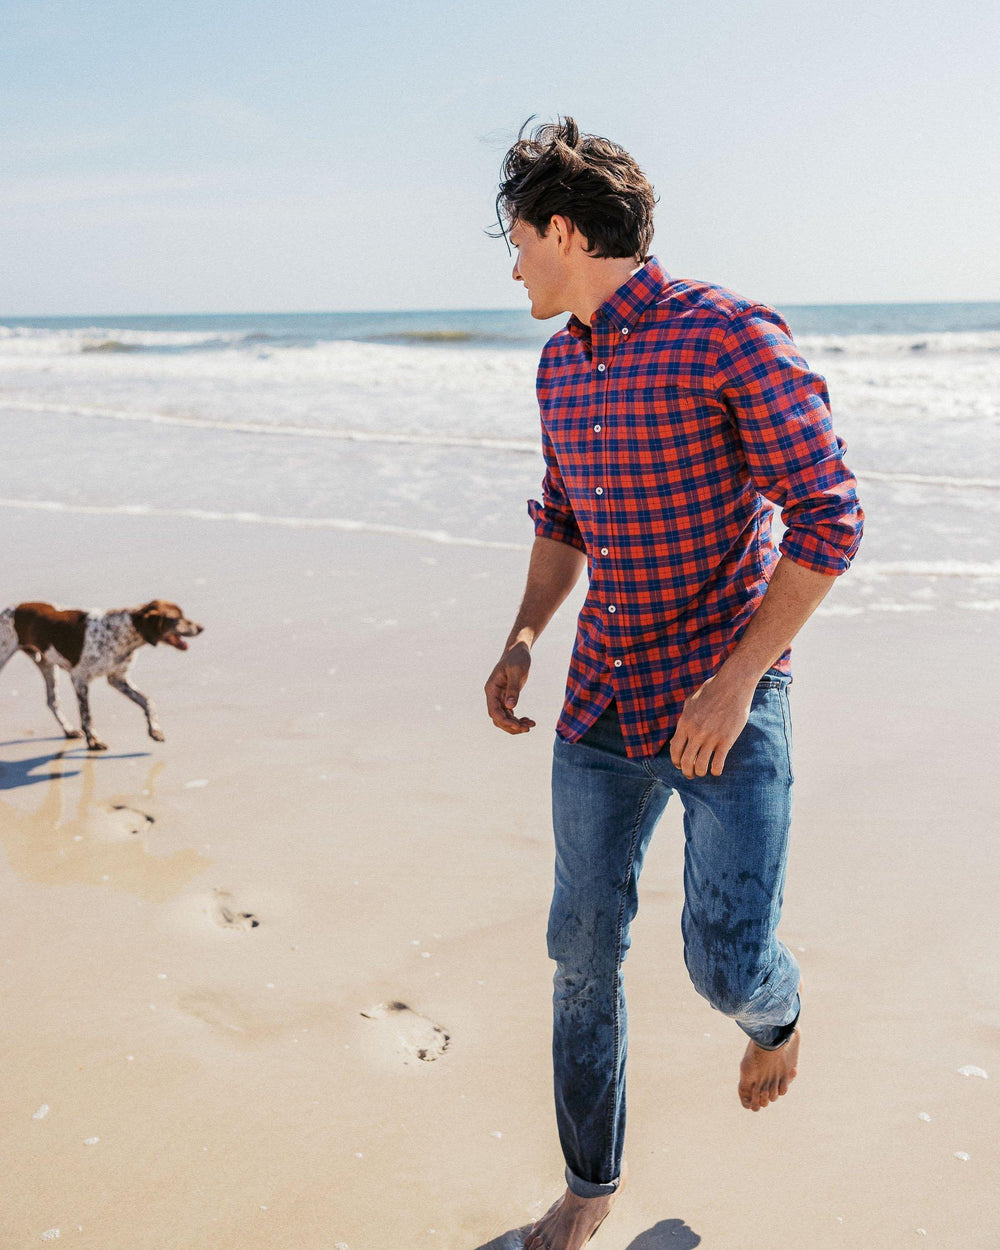 The lifestyle view of the Men's Navy Charleston Denim Jeans by Southern Tide - Medium Wash